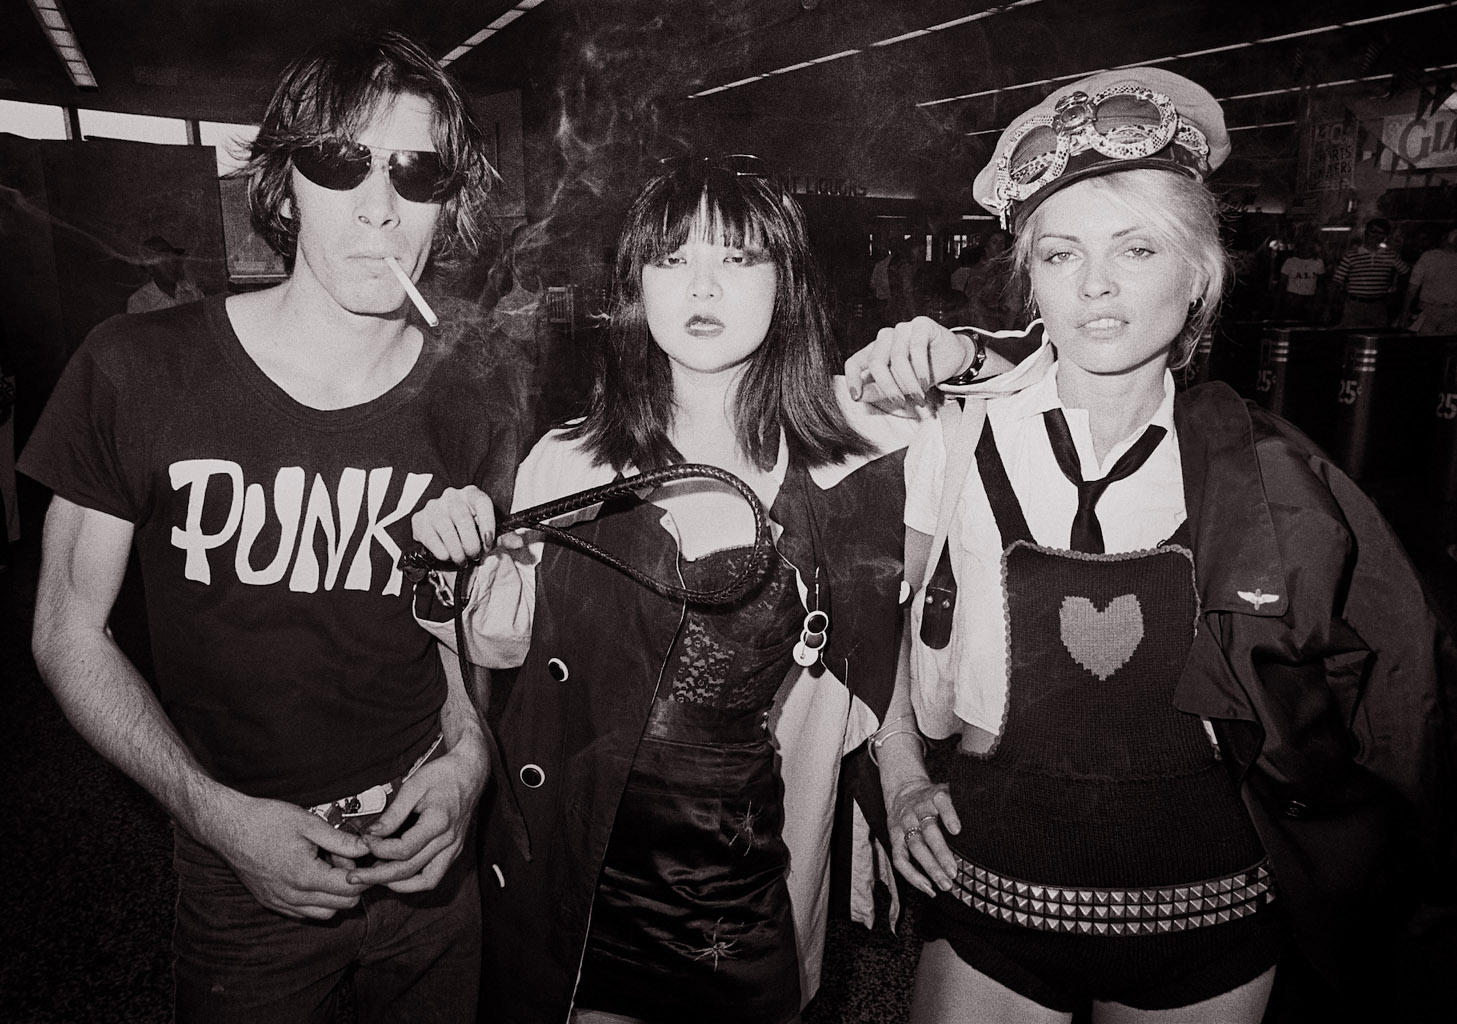 Debbie and Anya with journalist and Punk magazine co-founder, Legs McNeil.